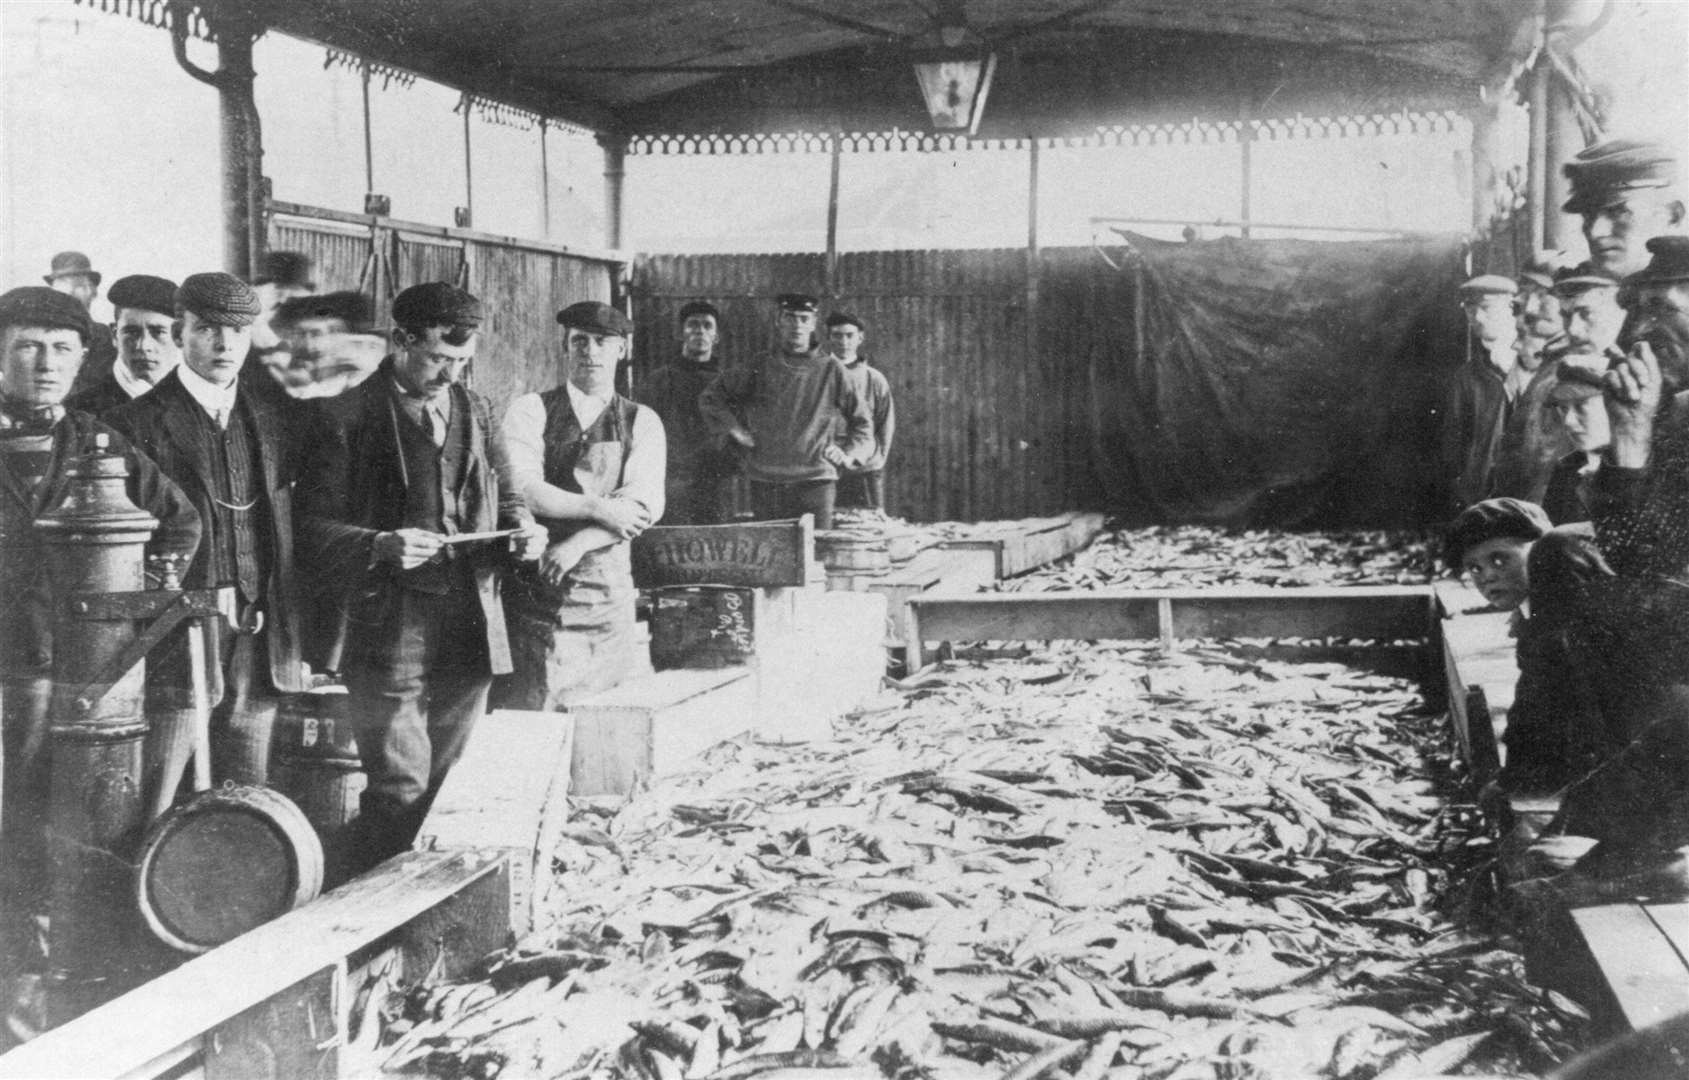 A record catch of mackerel in fish shed no.3, circa 1910. All images from new book, Folkestone's Fishing Industry Past & Present